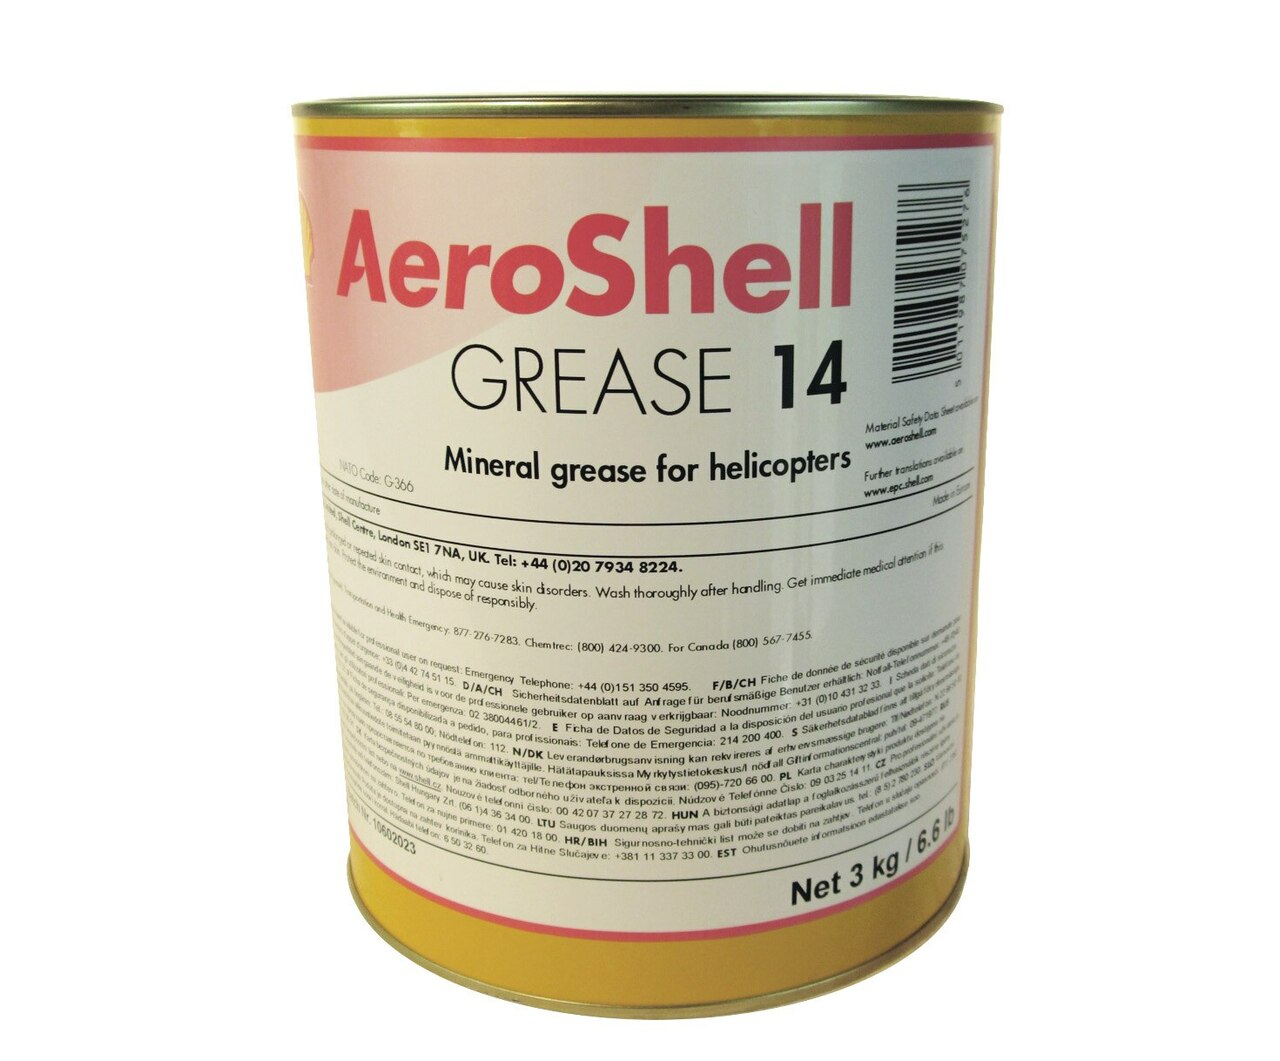  - Grease 14 Multi-Purpose Helicopter Mineral Grease - 37.5 LB Pail